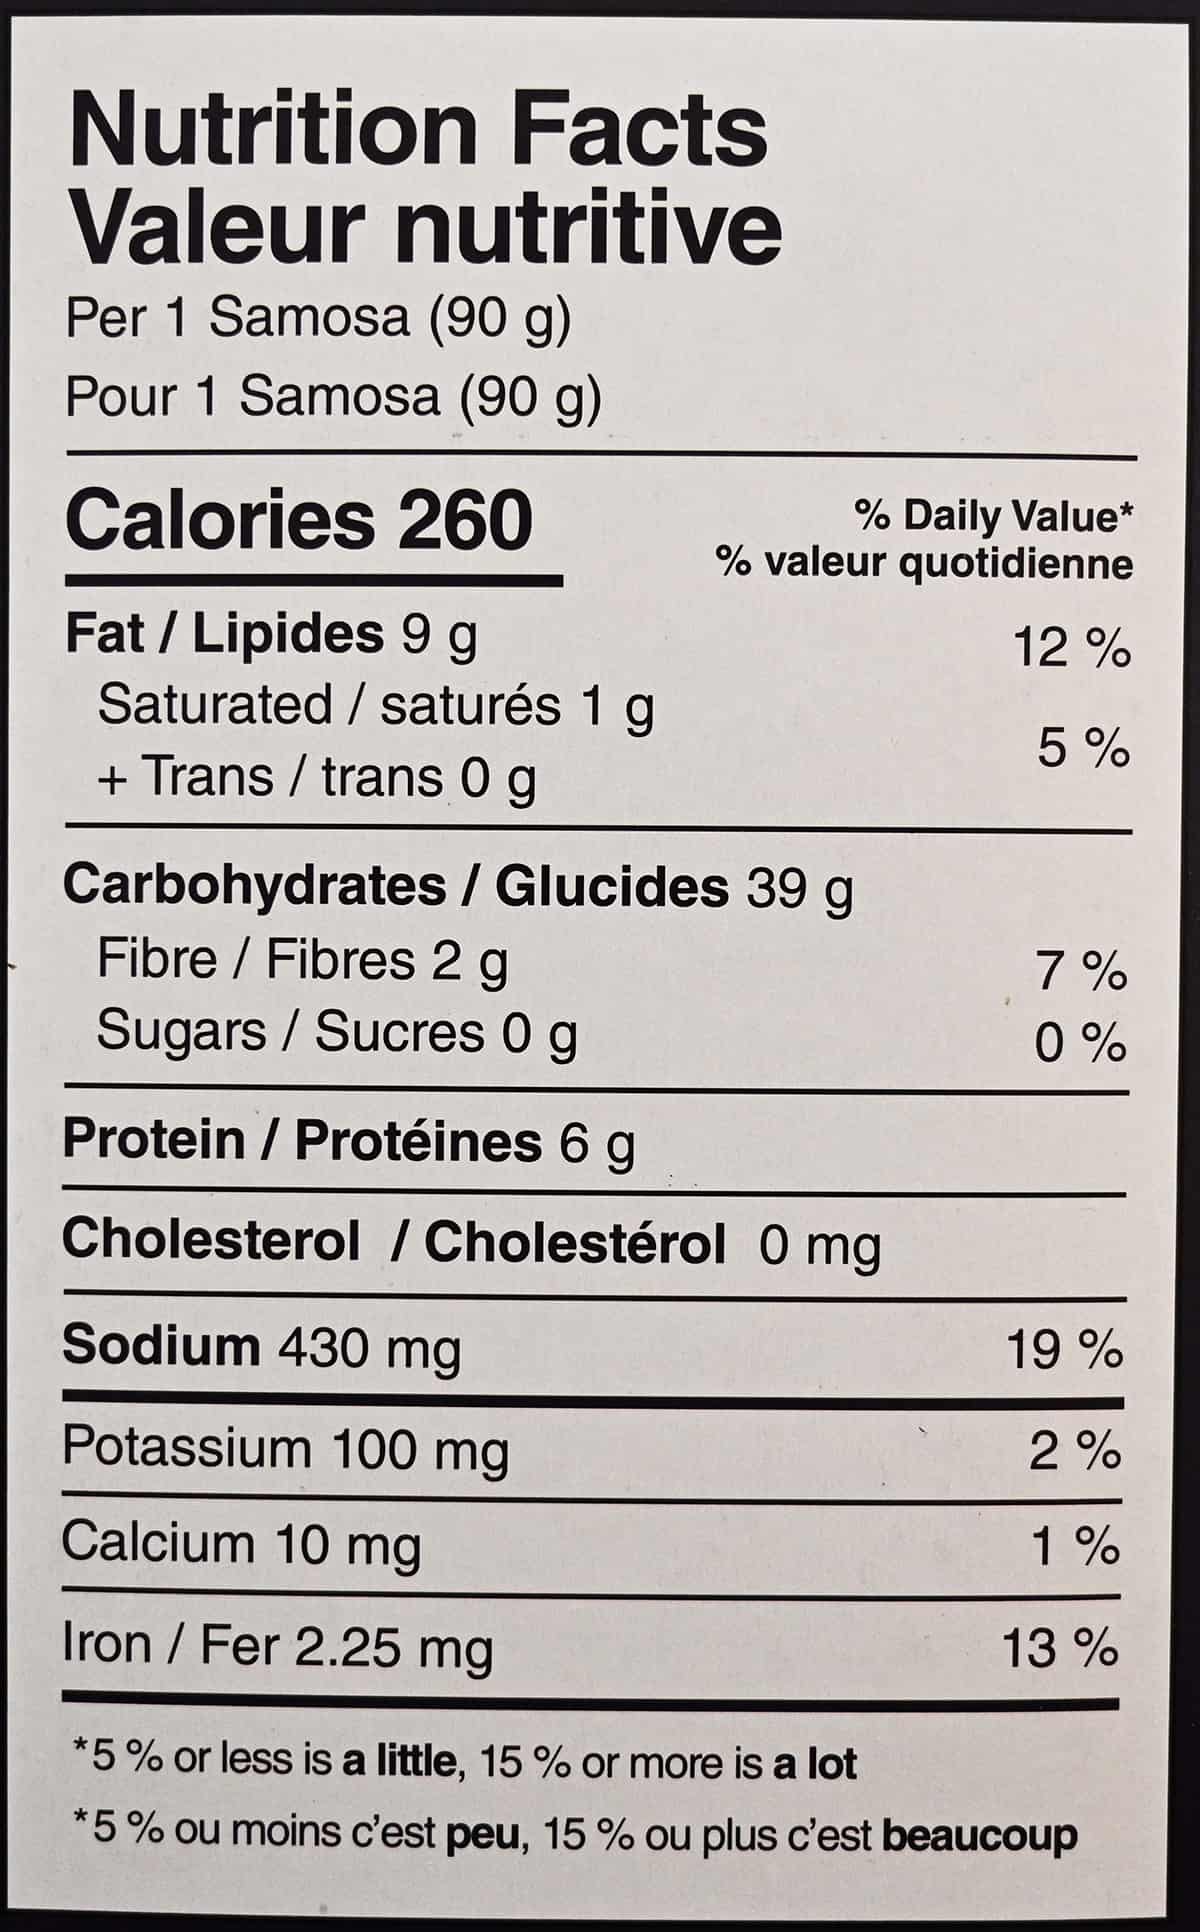 Image of the nutrition facts from the package.